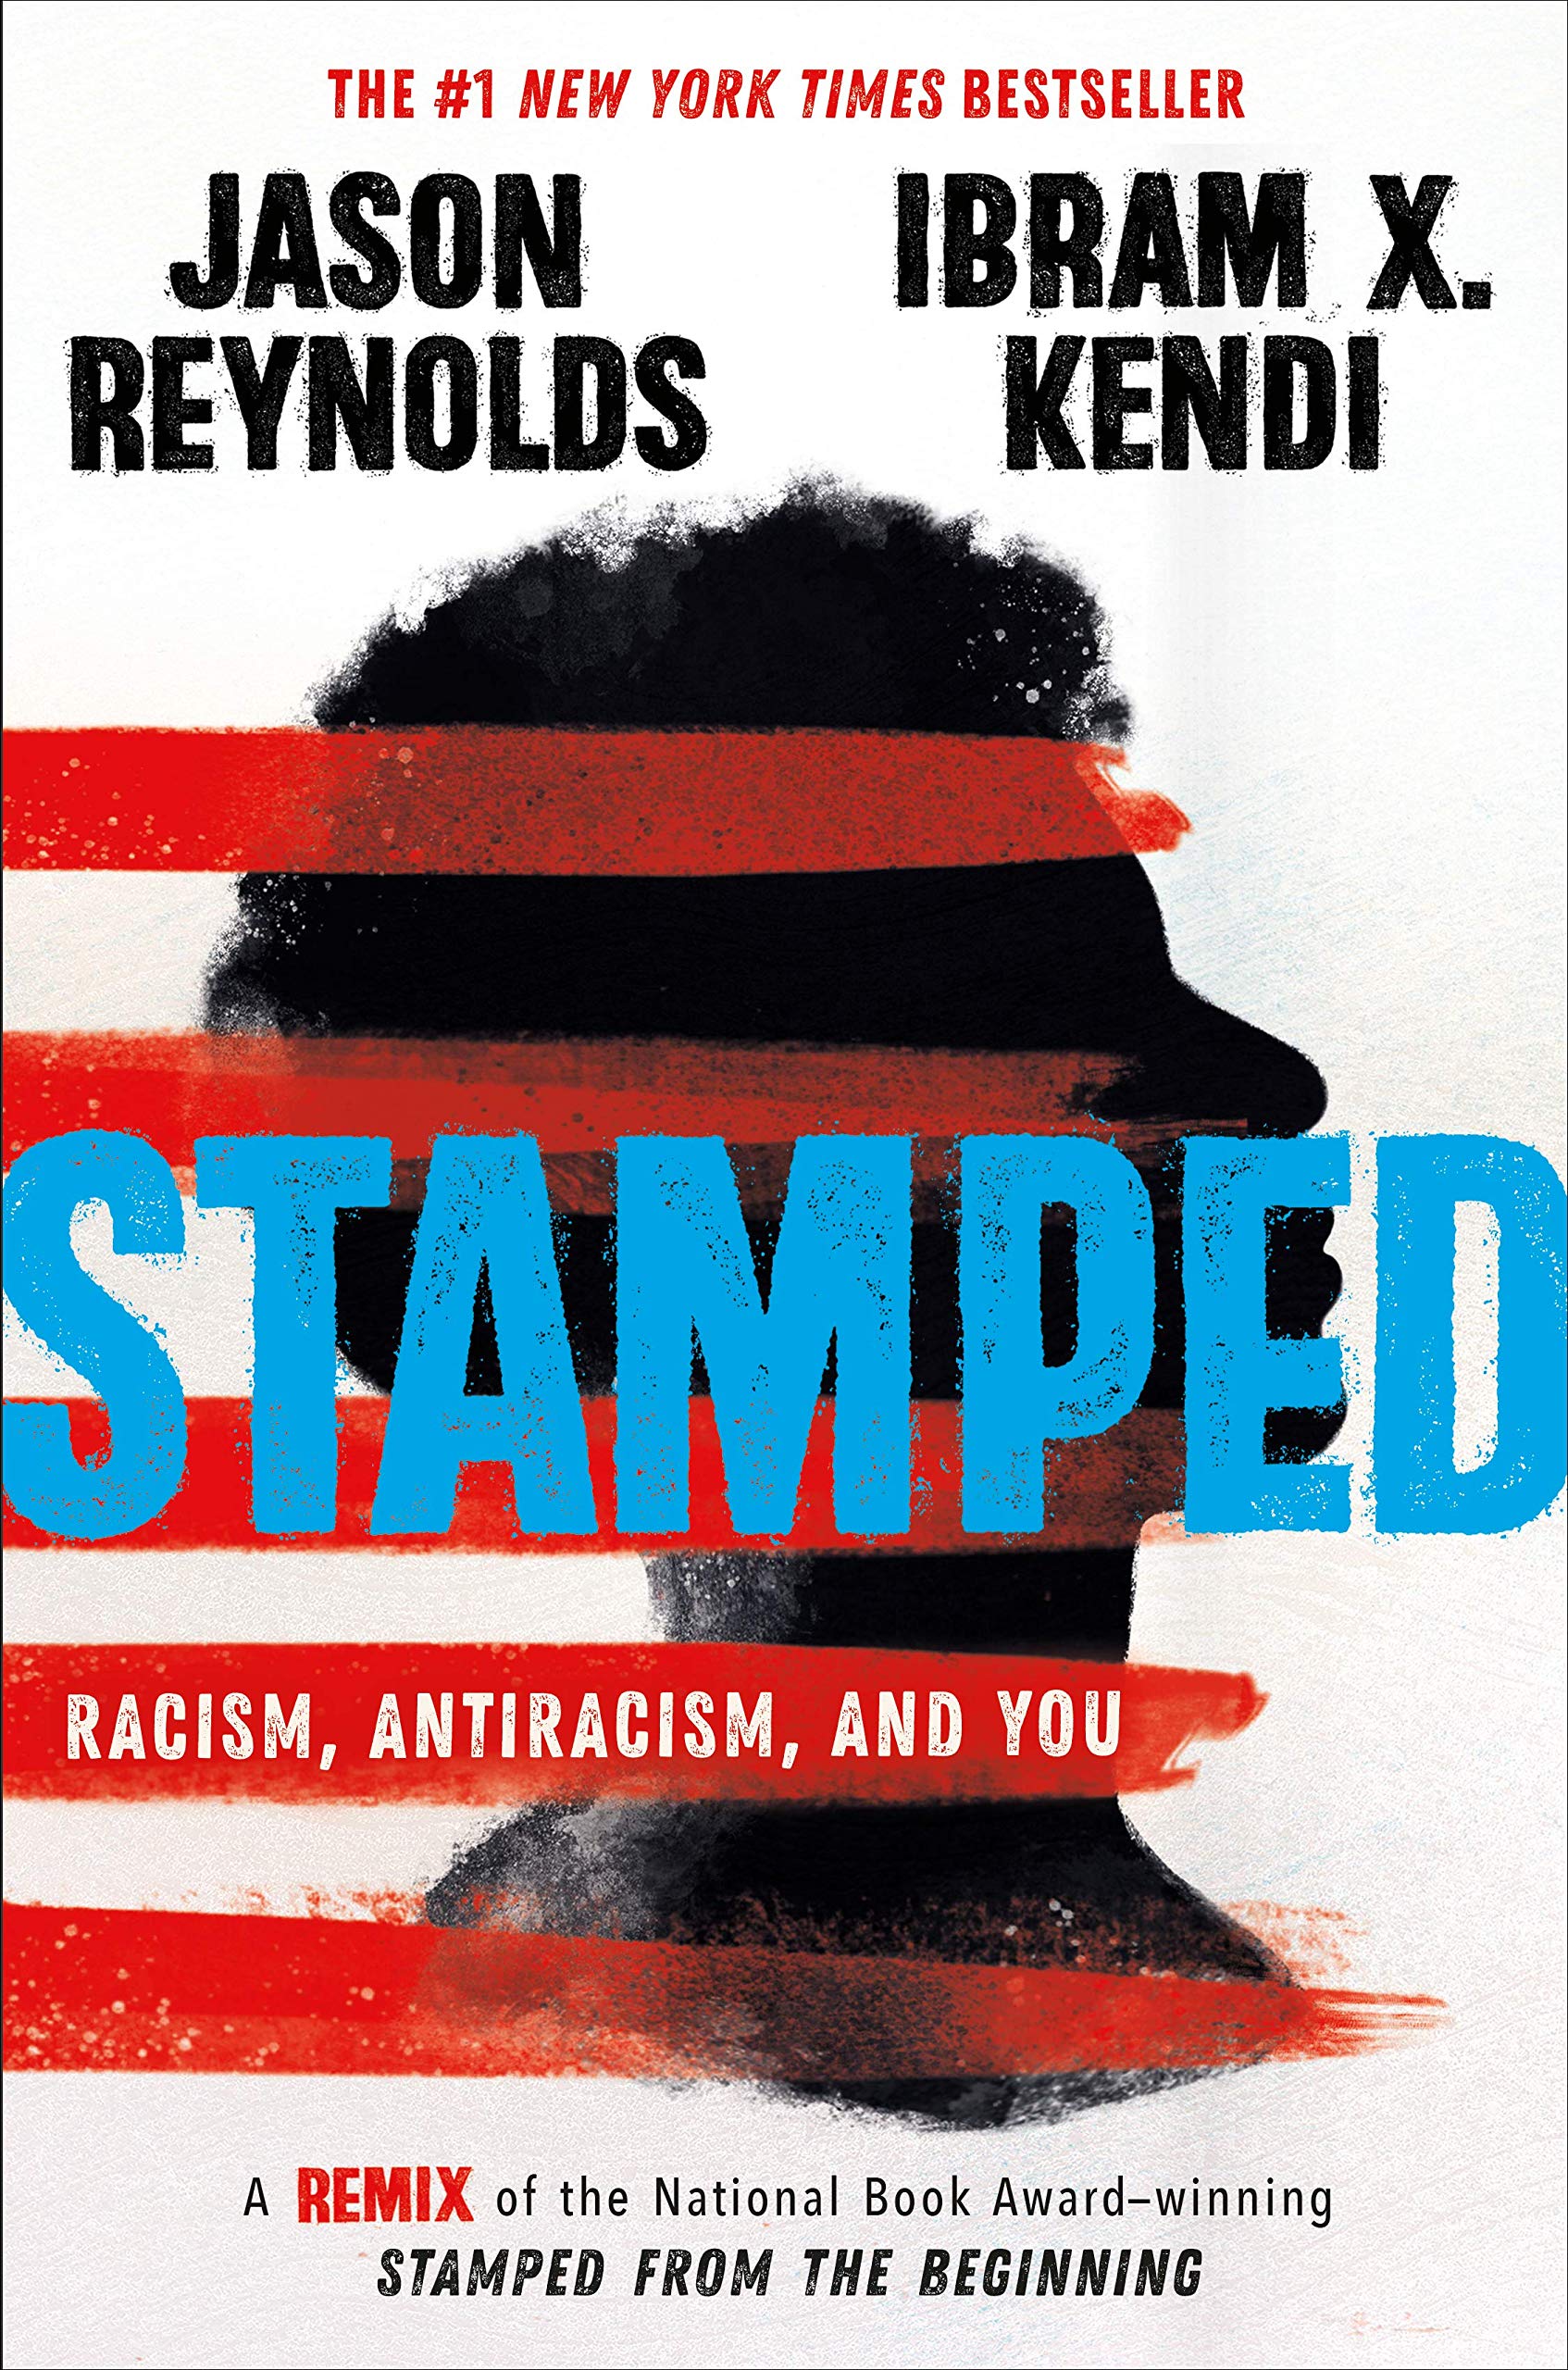 Book cover of "Stamped"